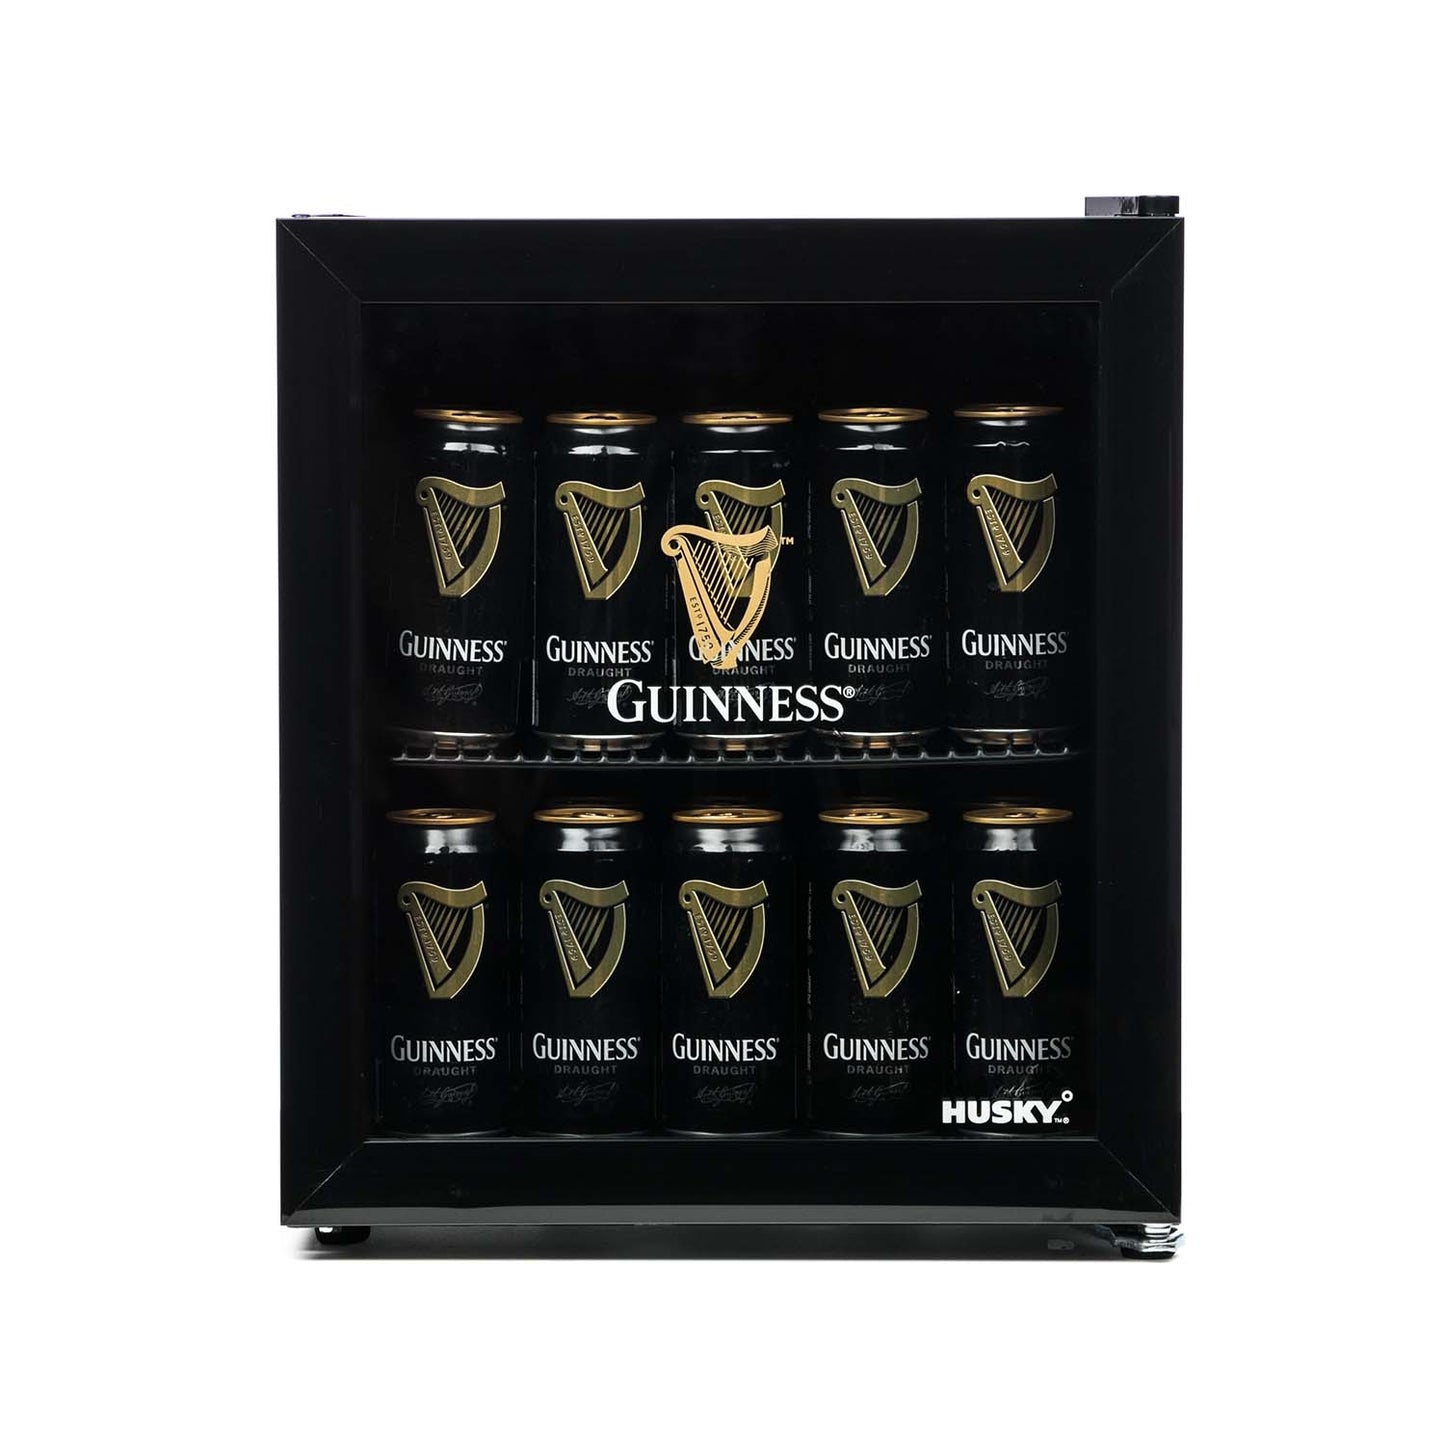 Guinness Beer Fridge with six cans of iconic stout. 
revised: Guinness Fridge with six cans of iconic stout.